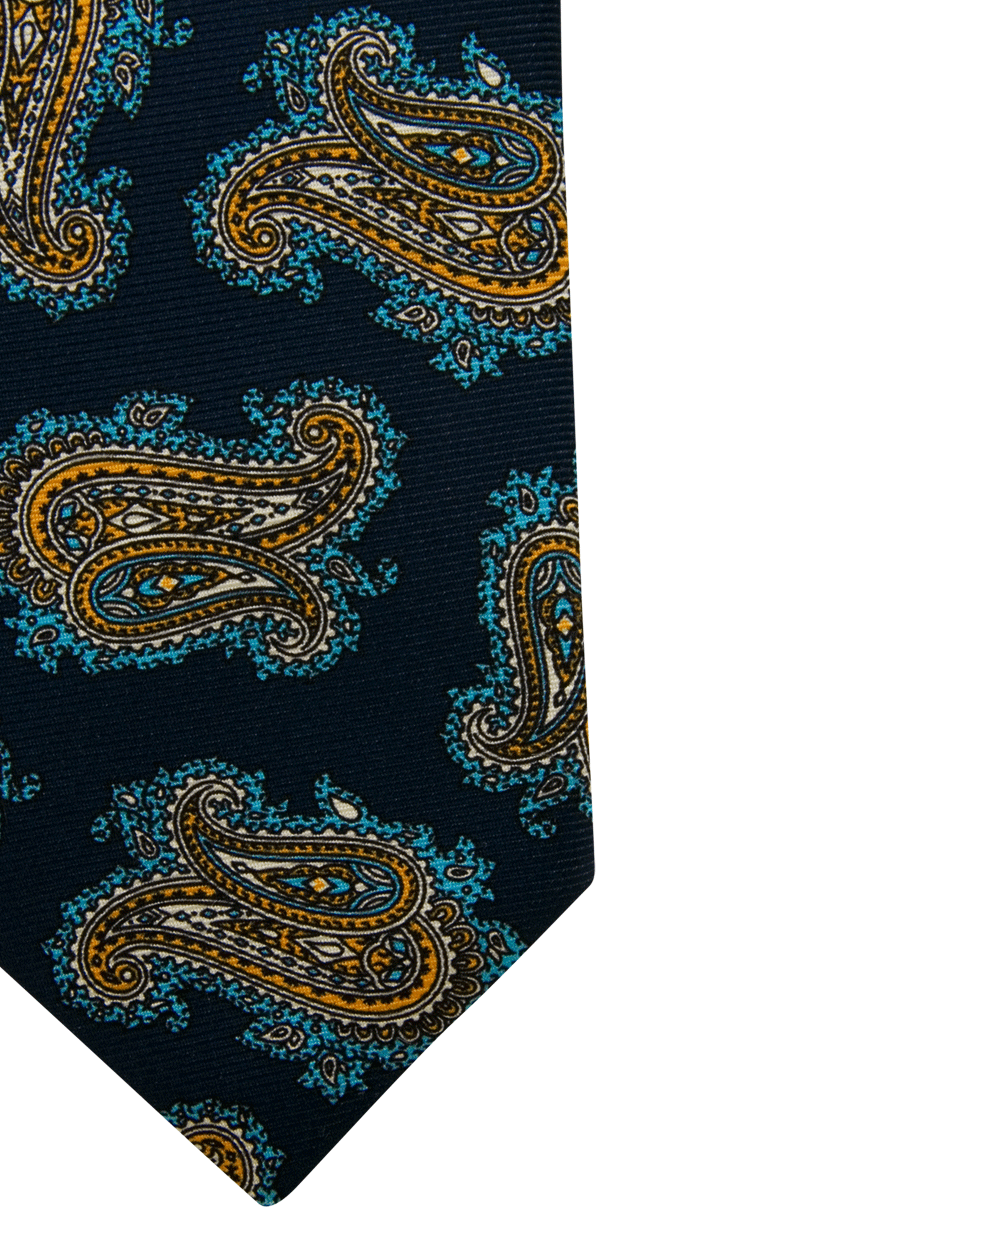 Navy and Gold Paisley Tie